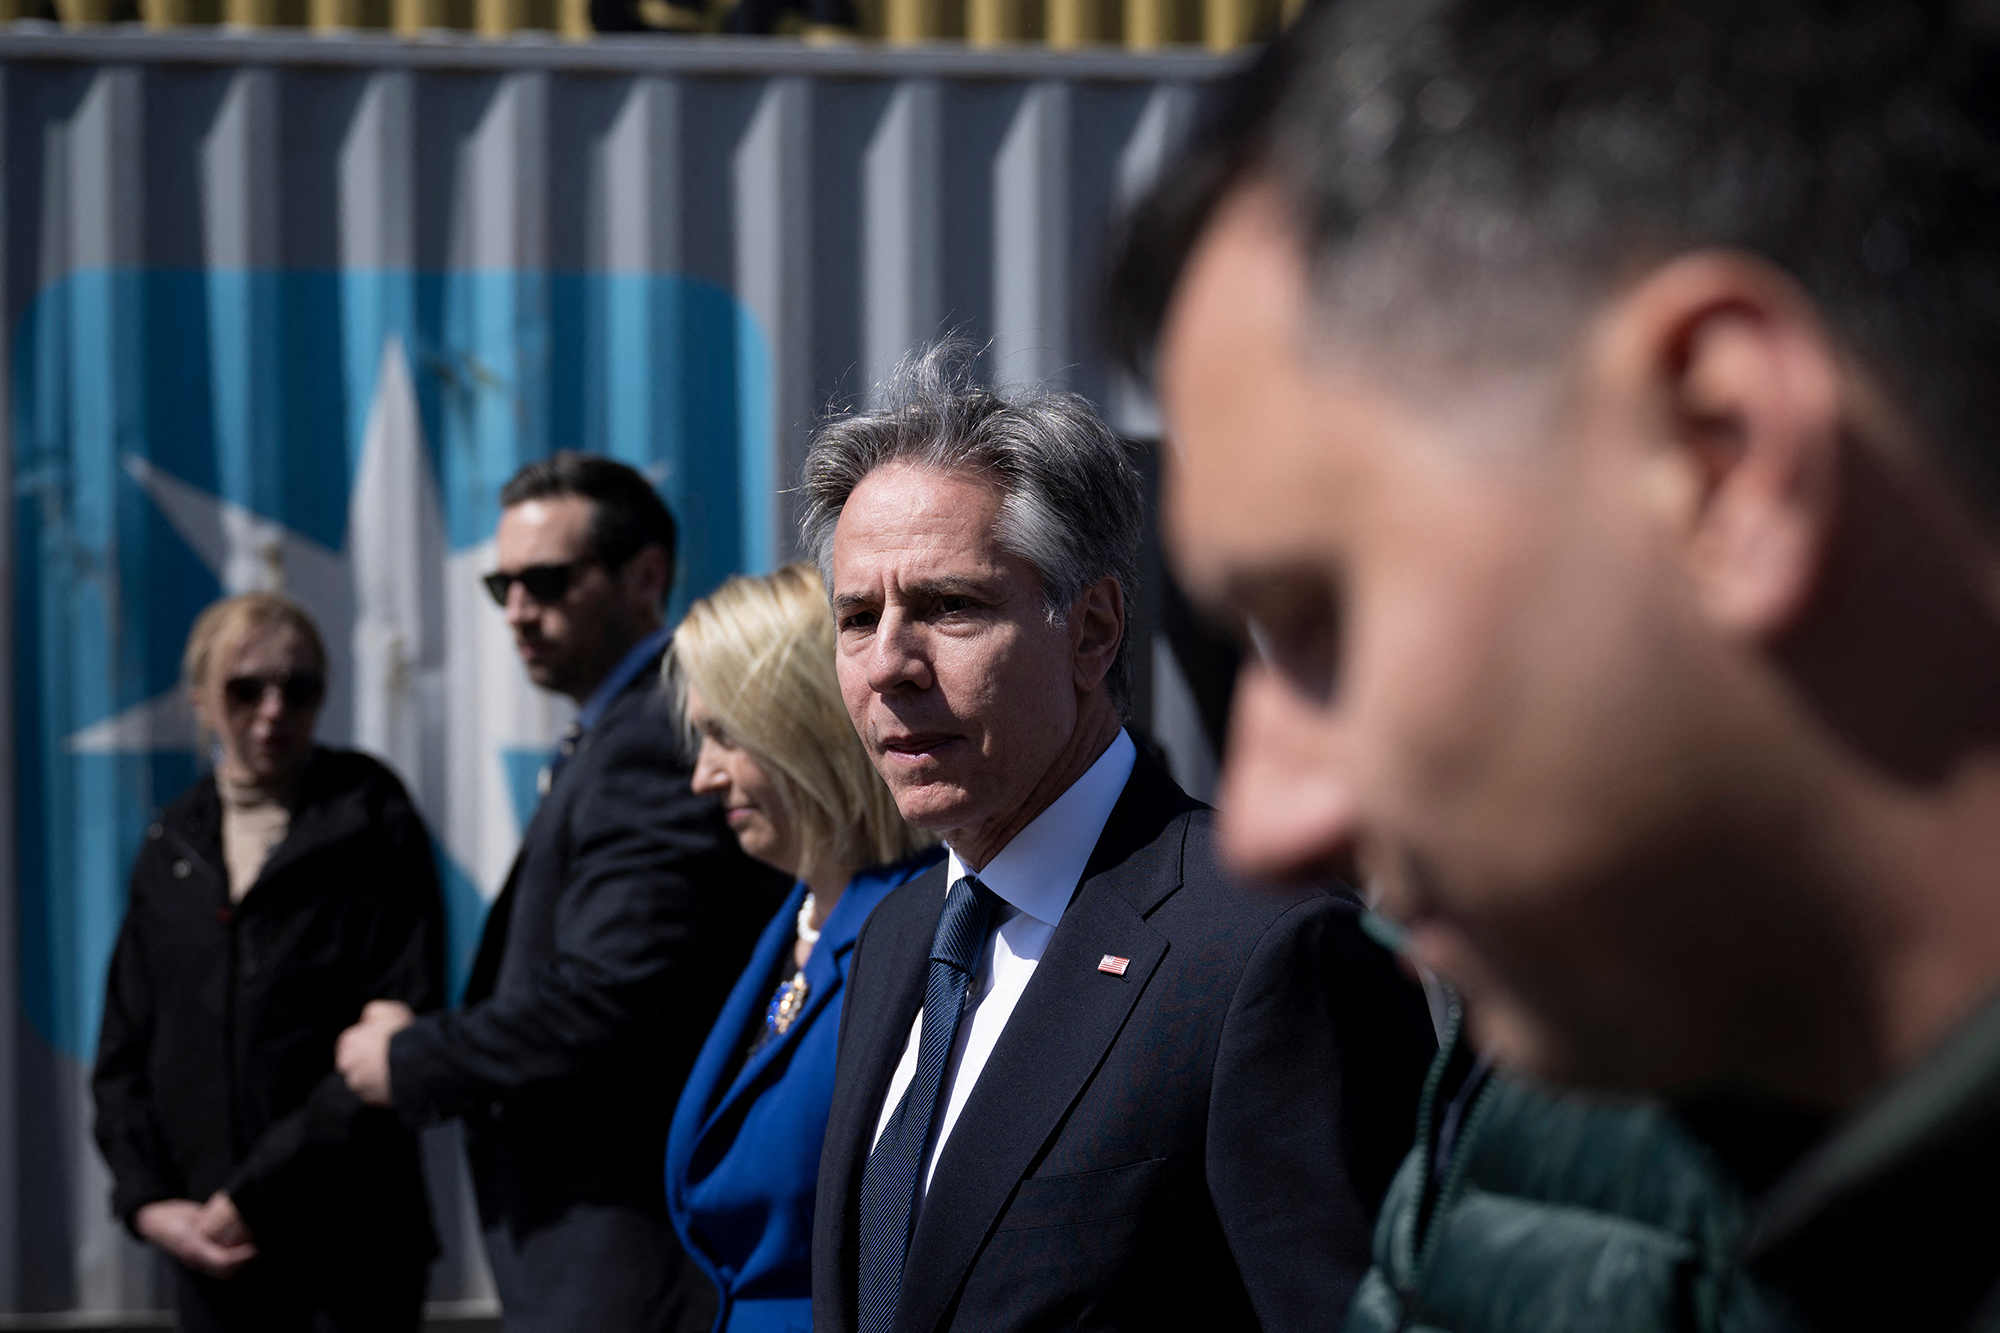 US Secretary of State Antony Blinken (C) leaves after his visit to an agricultural logistics and transshipment facility in Vyshneve, Kyiv region, on May 15. The United States will back Ukraine until the country's security is "guaranteed," US Secretary of State Antony Blinken said in a speech in Kyiv on May 14.